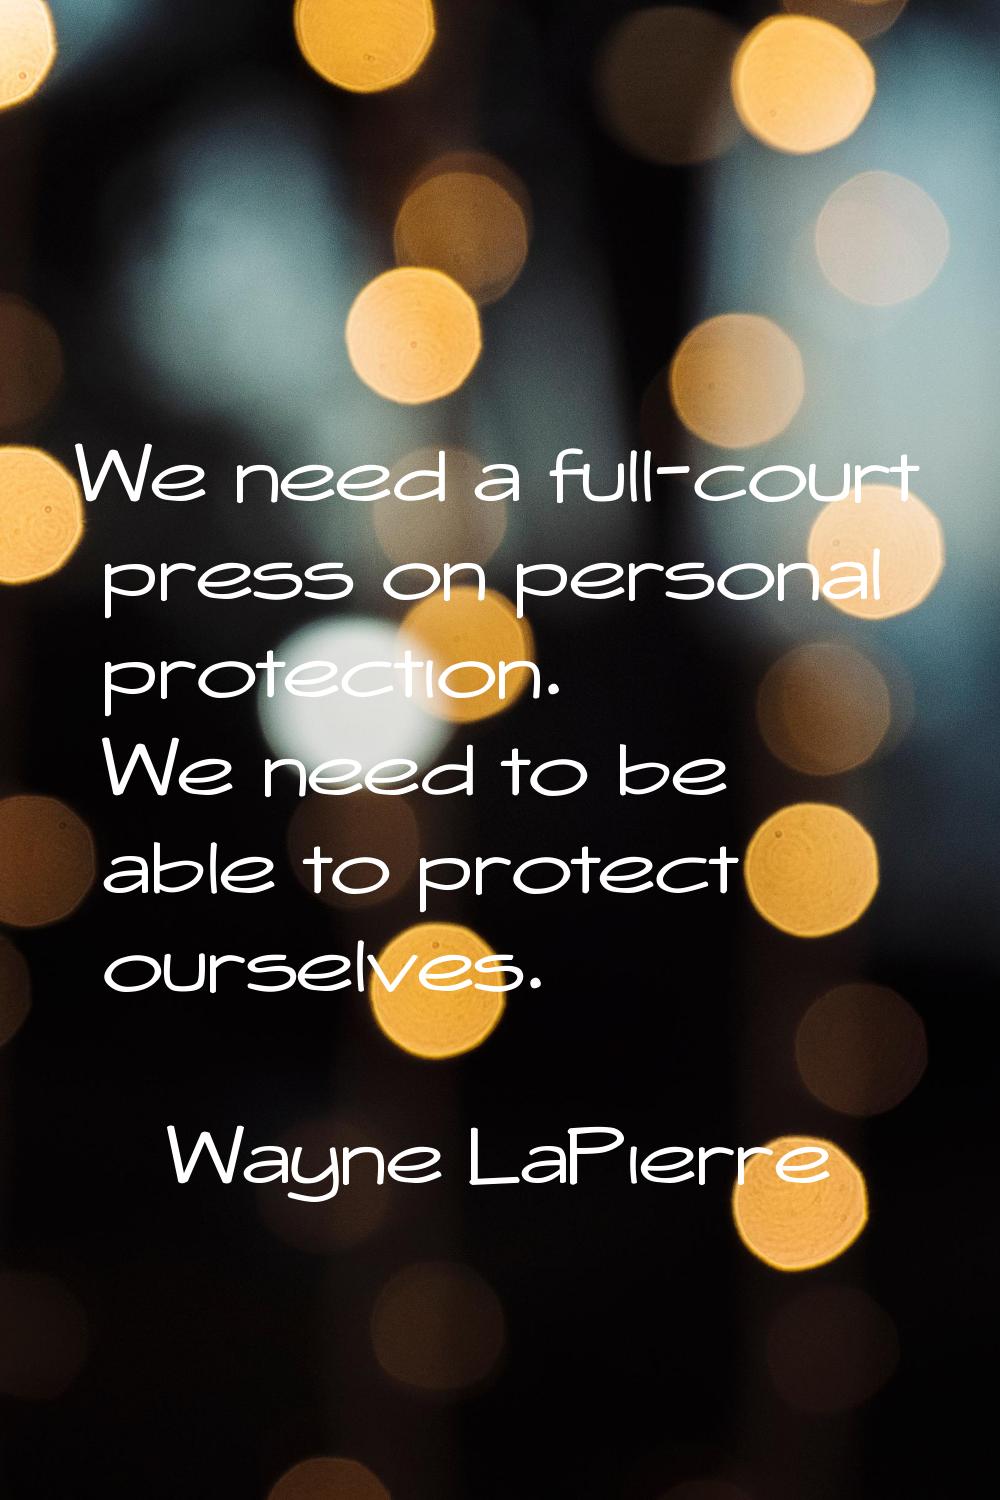 We need a full-court press on personal protection. We need to be able to protect ourselves.